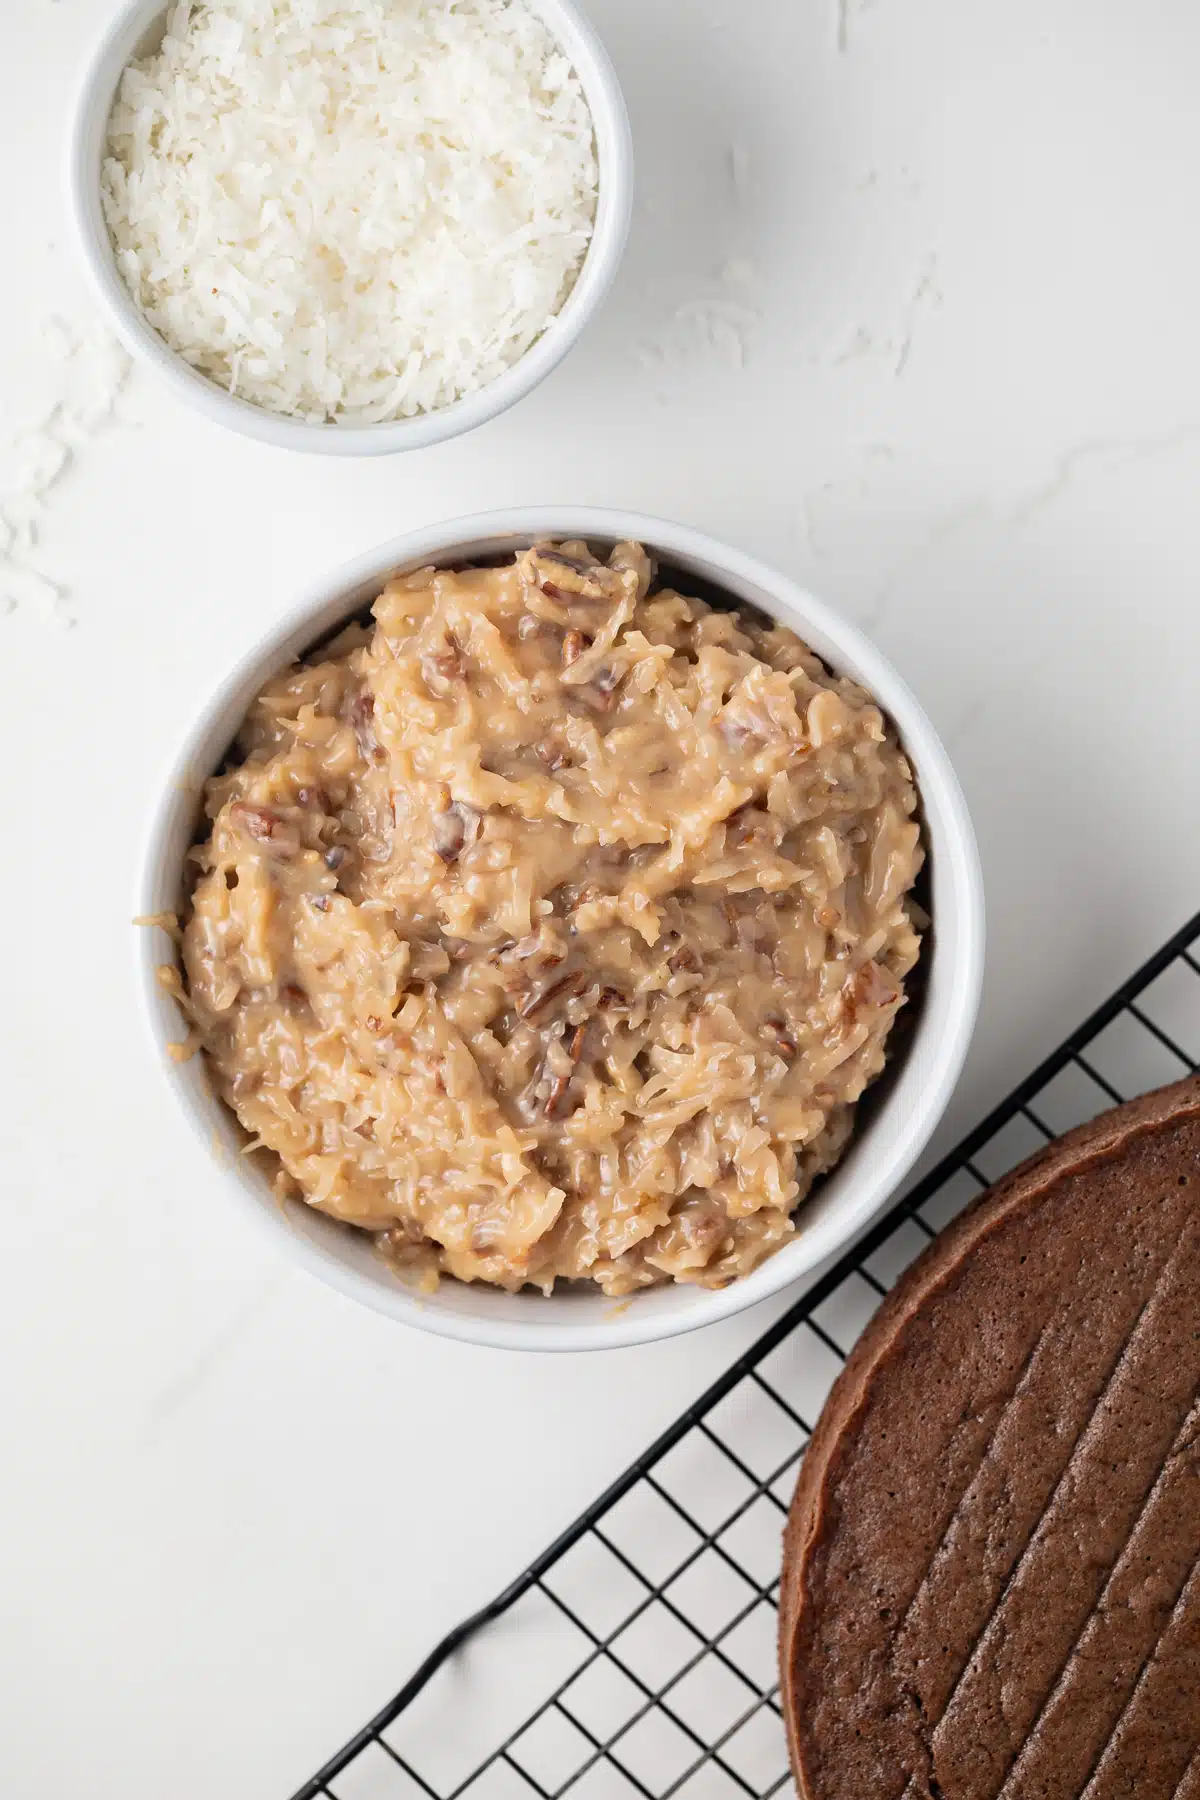 German chocolate cake frosting with coconut and pecans.